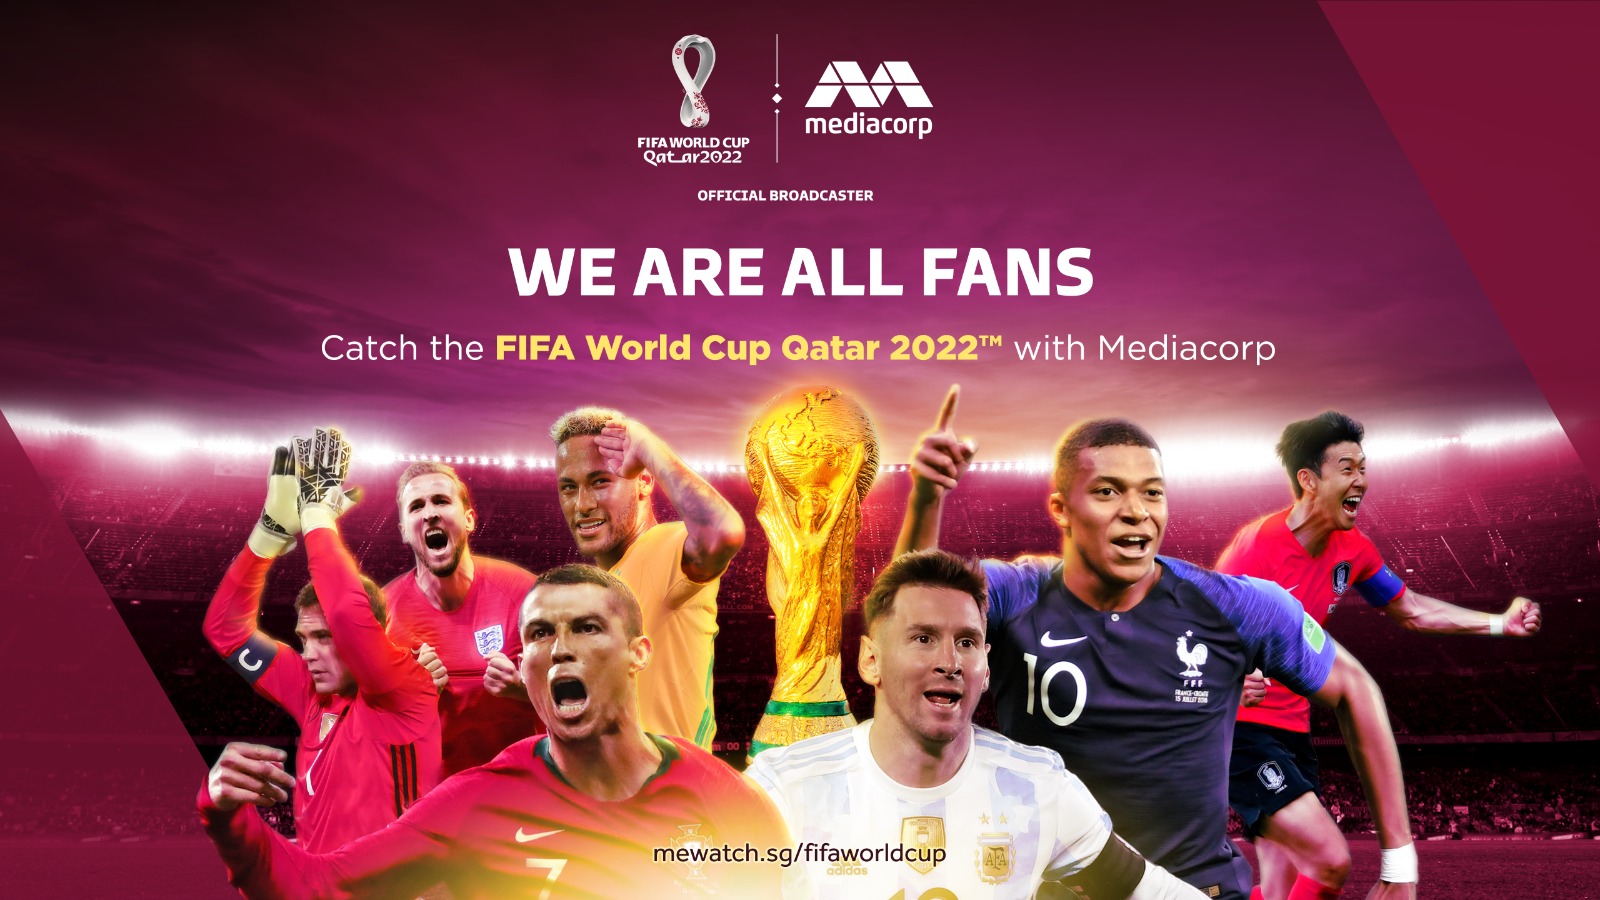 FIFA World Cup 2022 Mediacorp